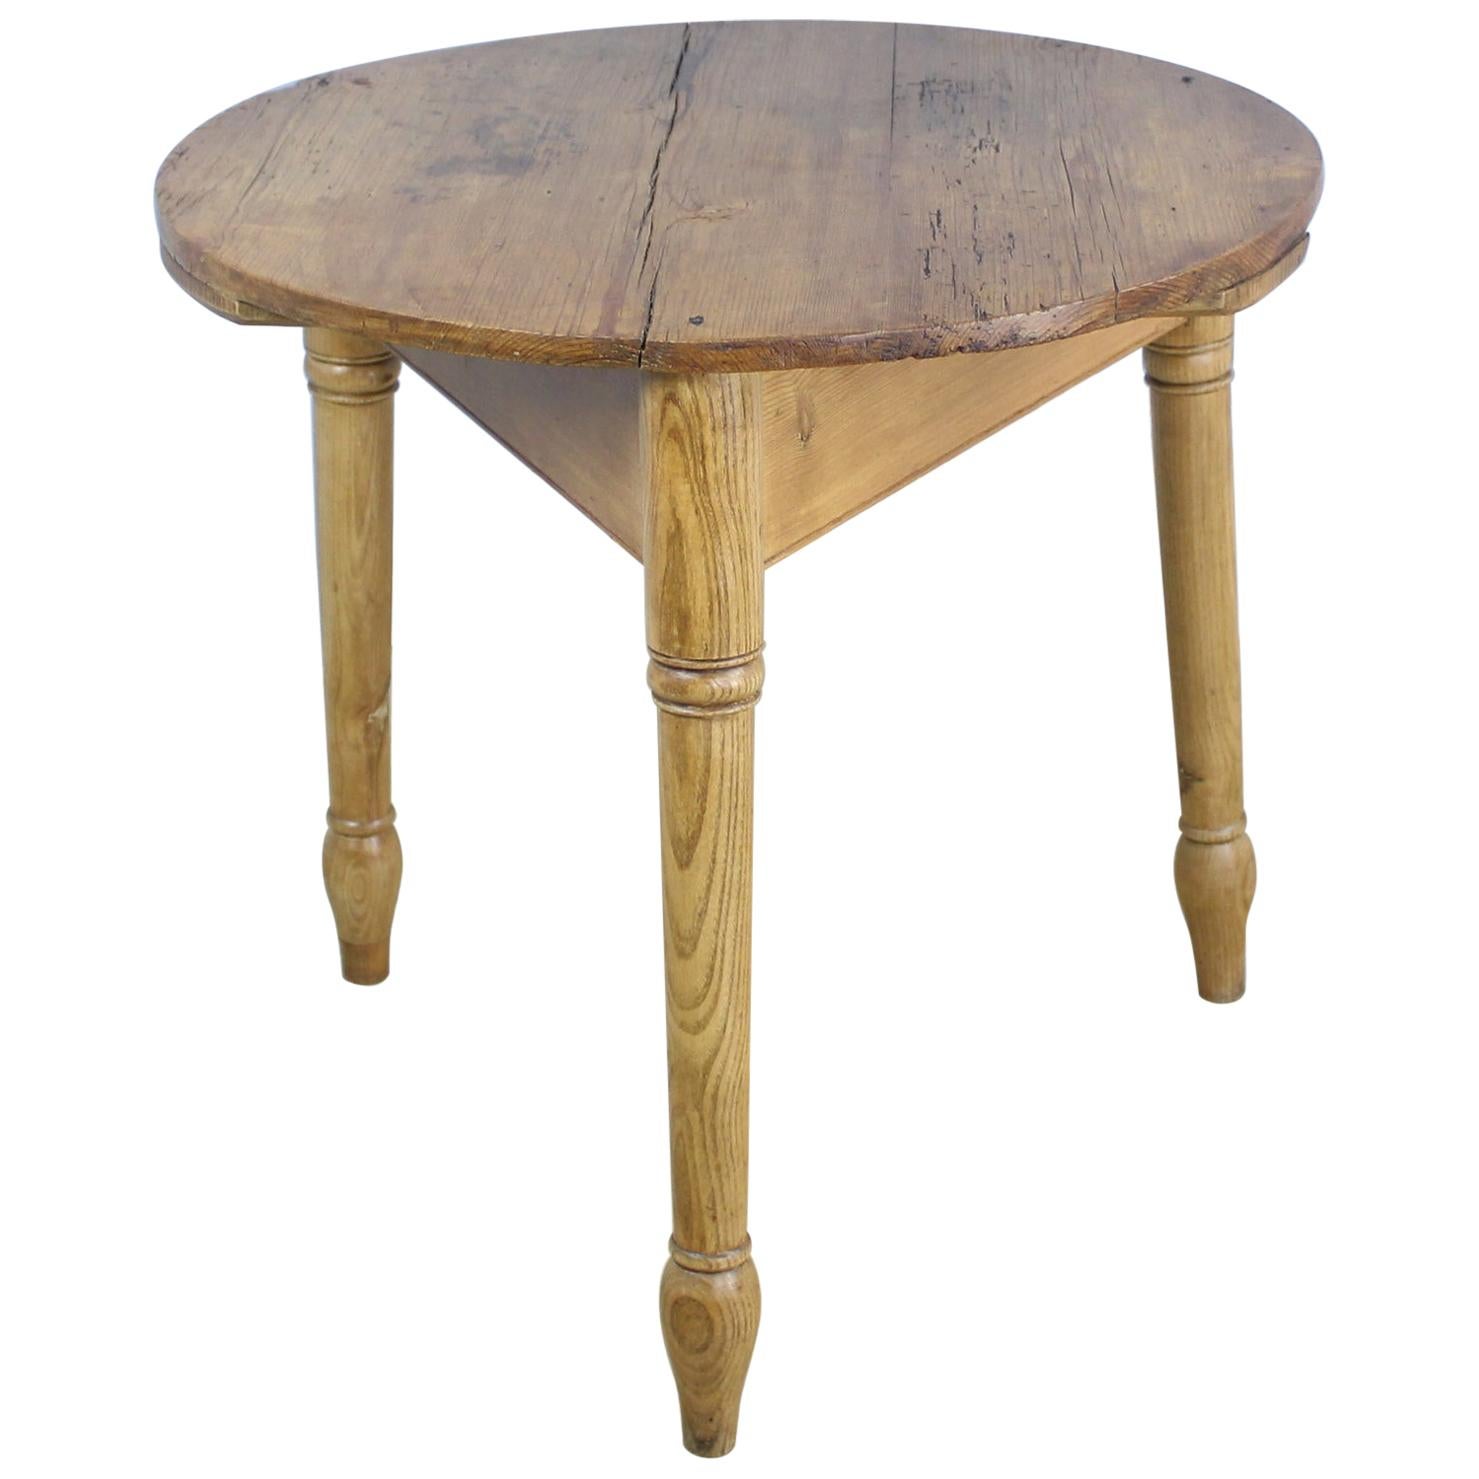 19th Century Pine Cricket Table with Turned Legs